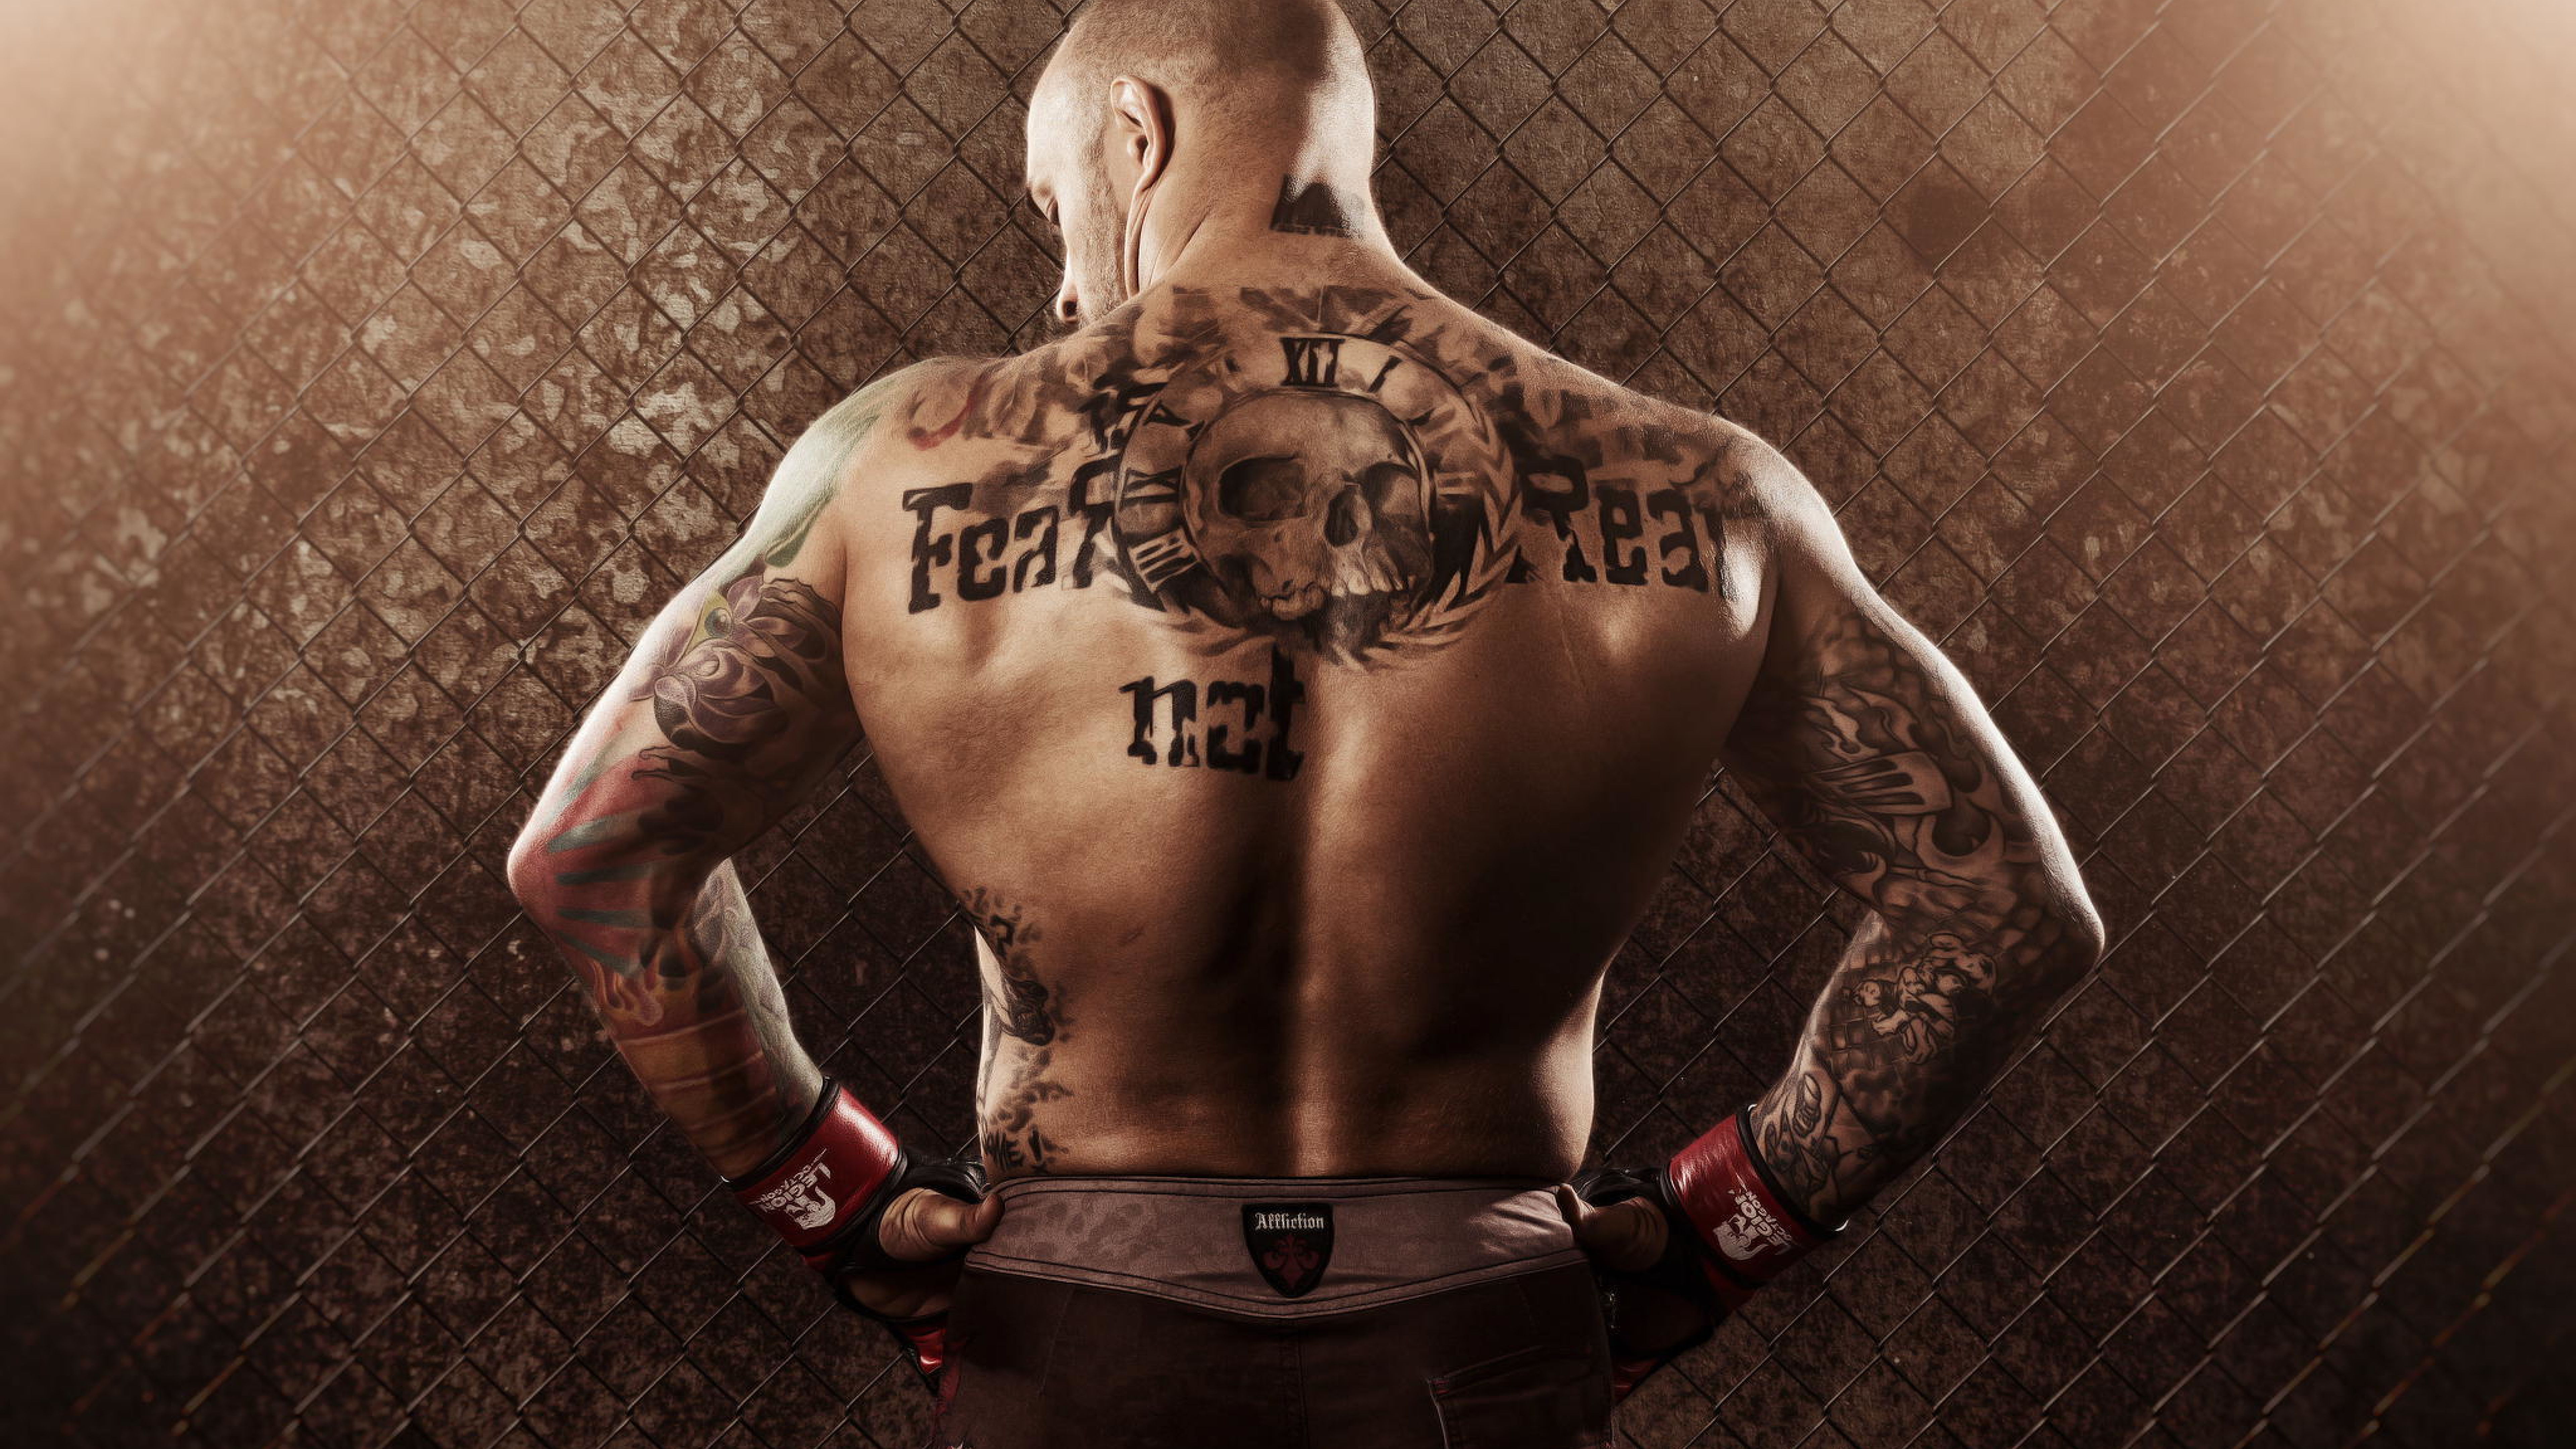 Mma Fighter Tattoo On Back , HD Wallpaper & Backgrounds